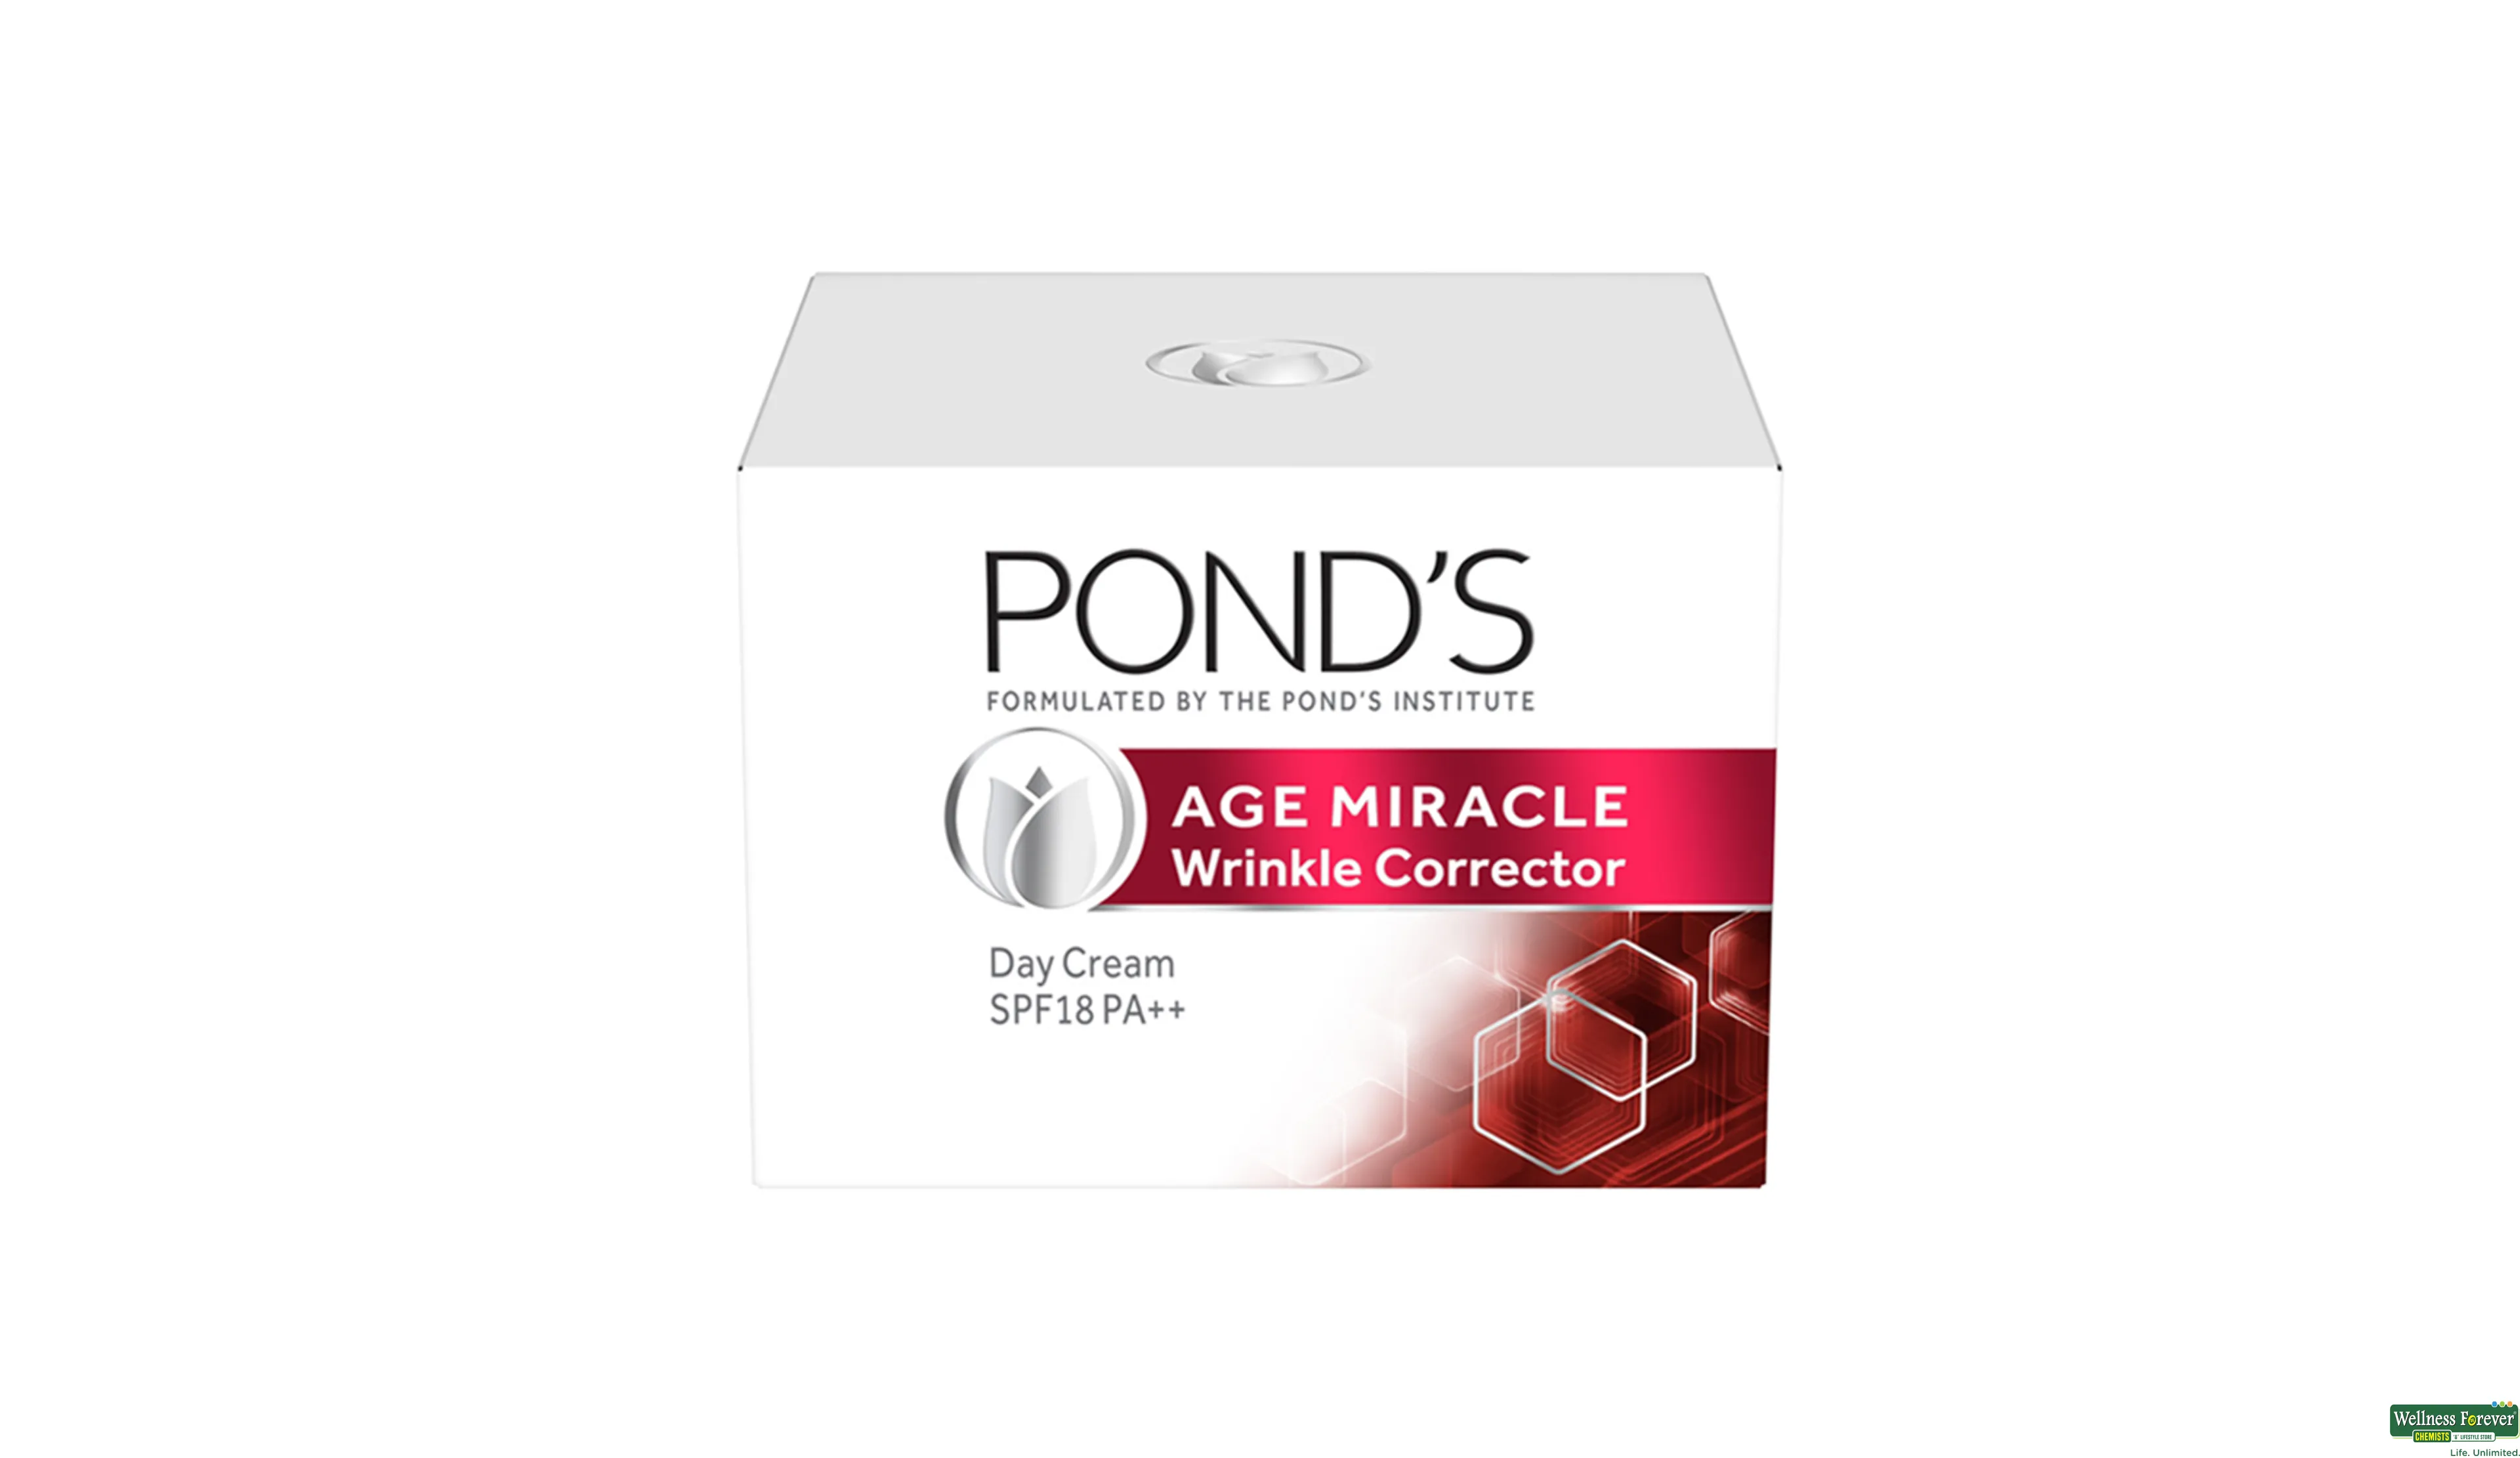 PONDS F/CRM AGE MIRACLE DAY 10GM- 2, 10GM, 